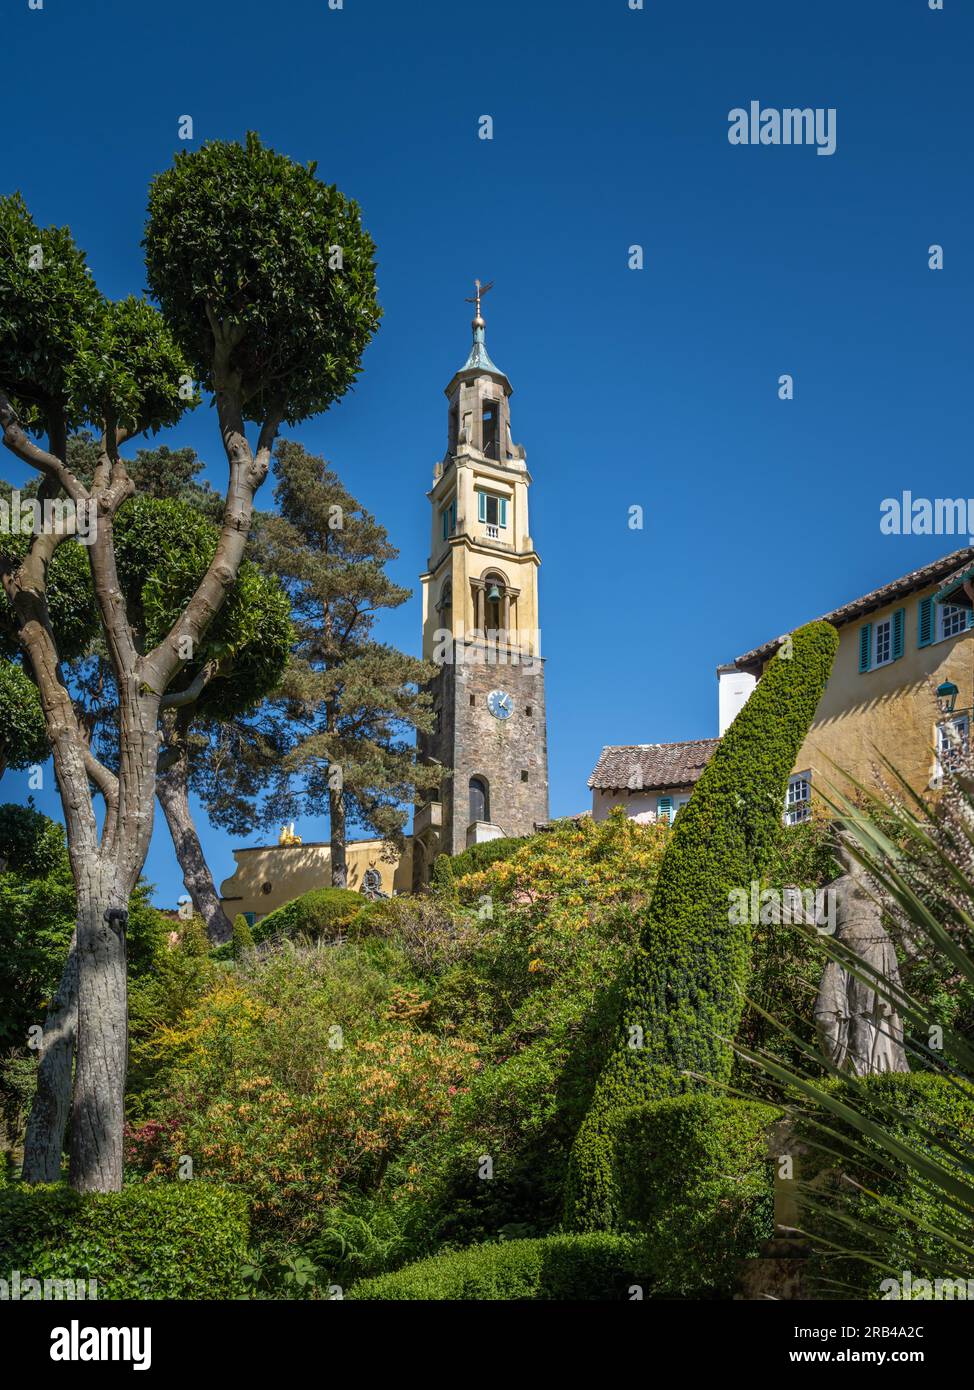 The Bell Tower, Portmeirion, North Wales, Regno Unito Foto Stock